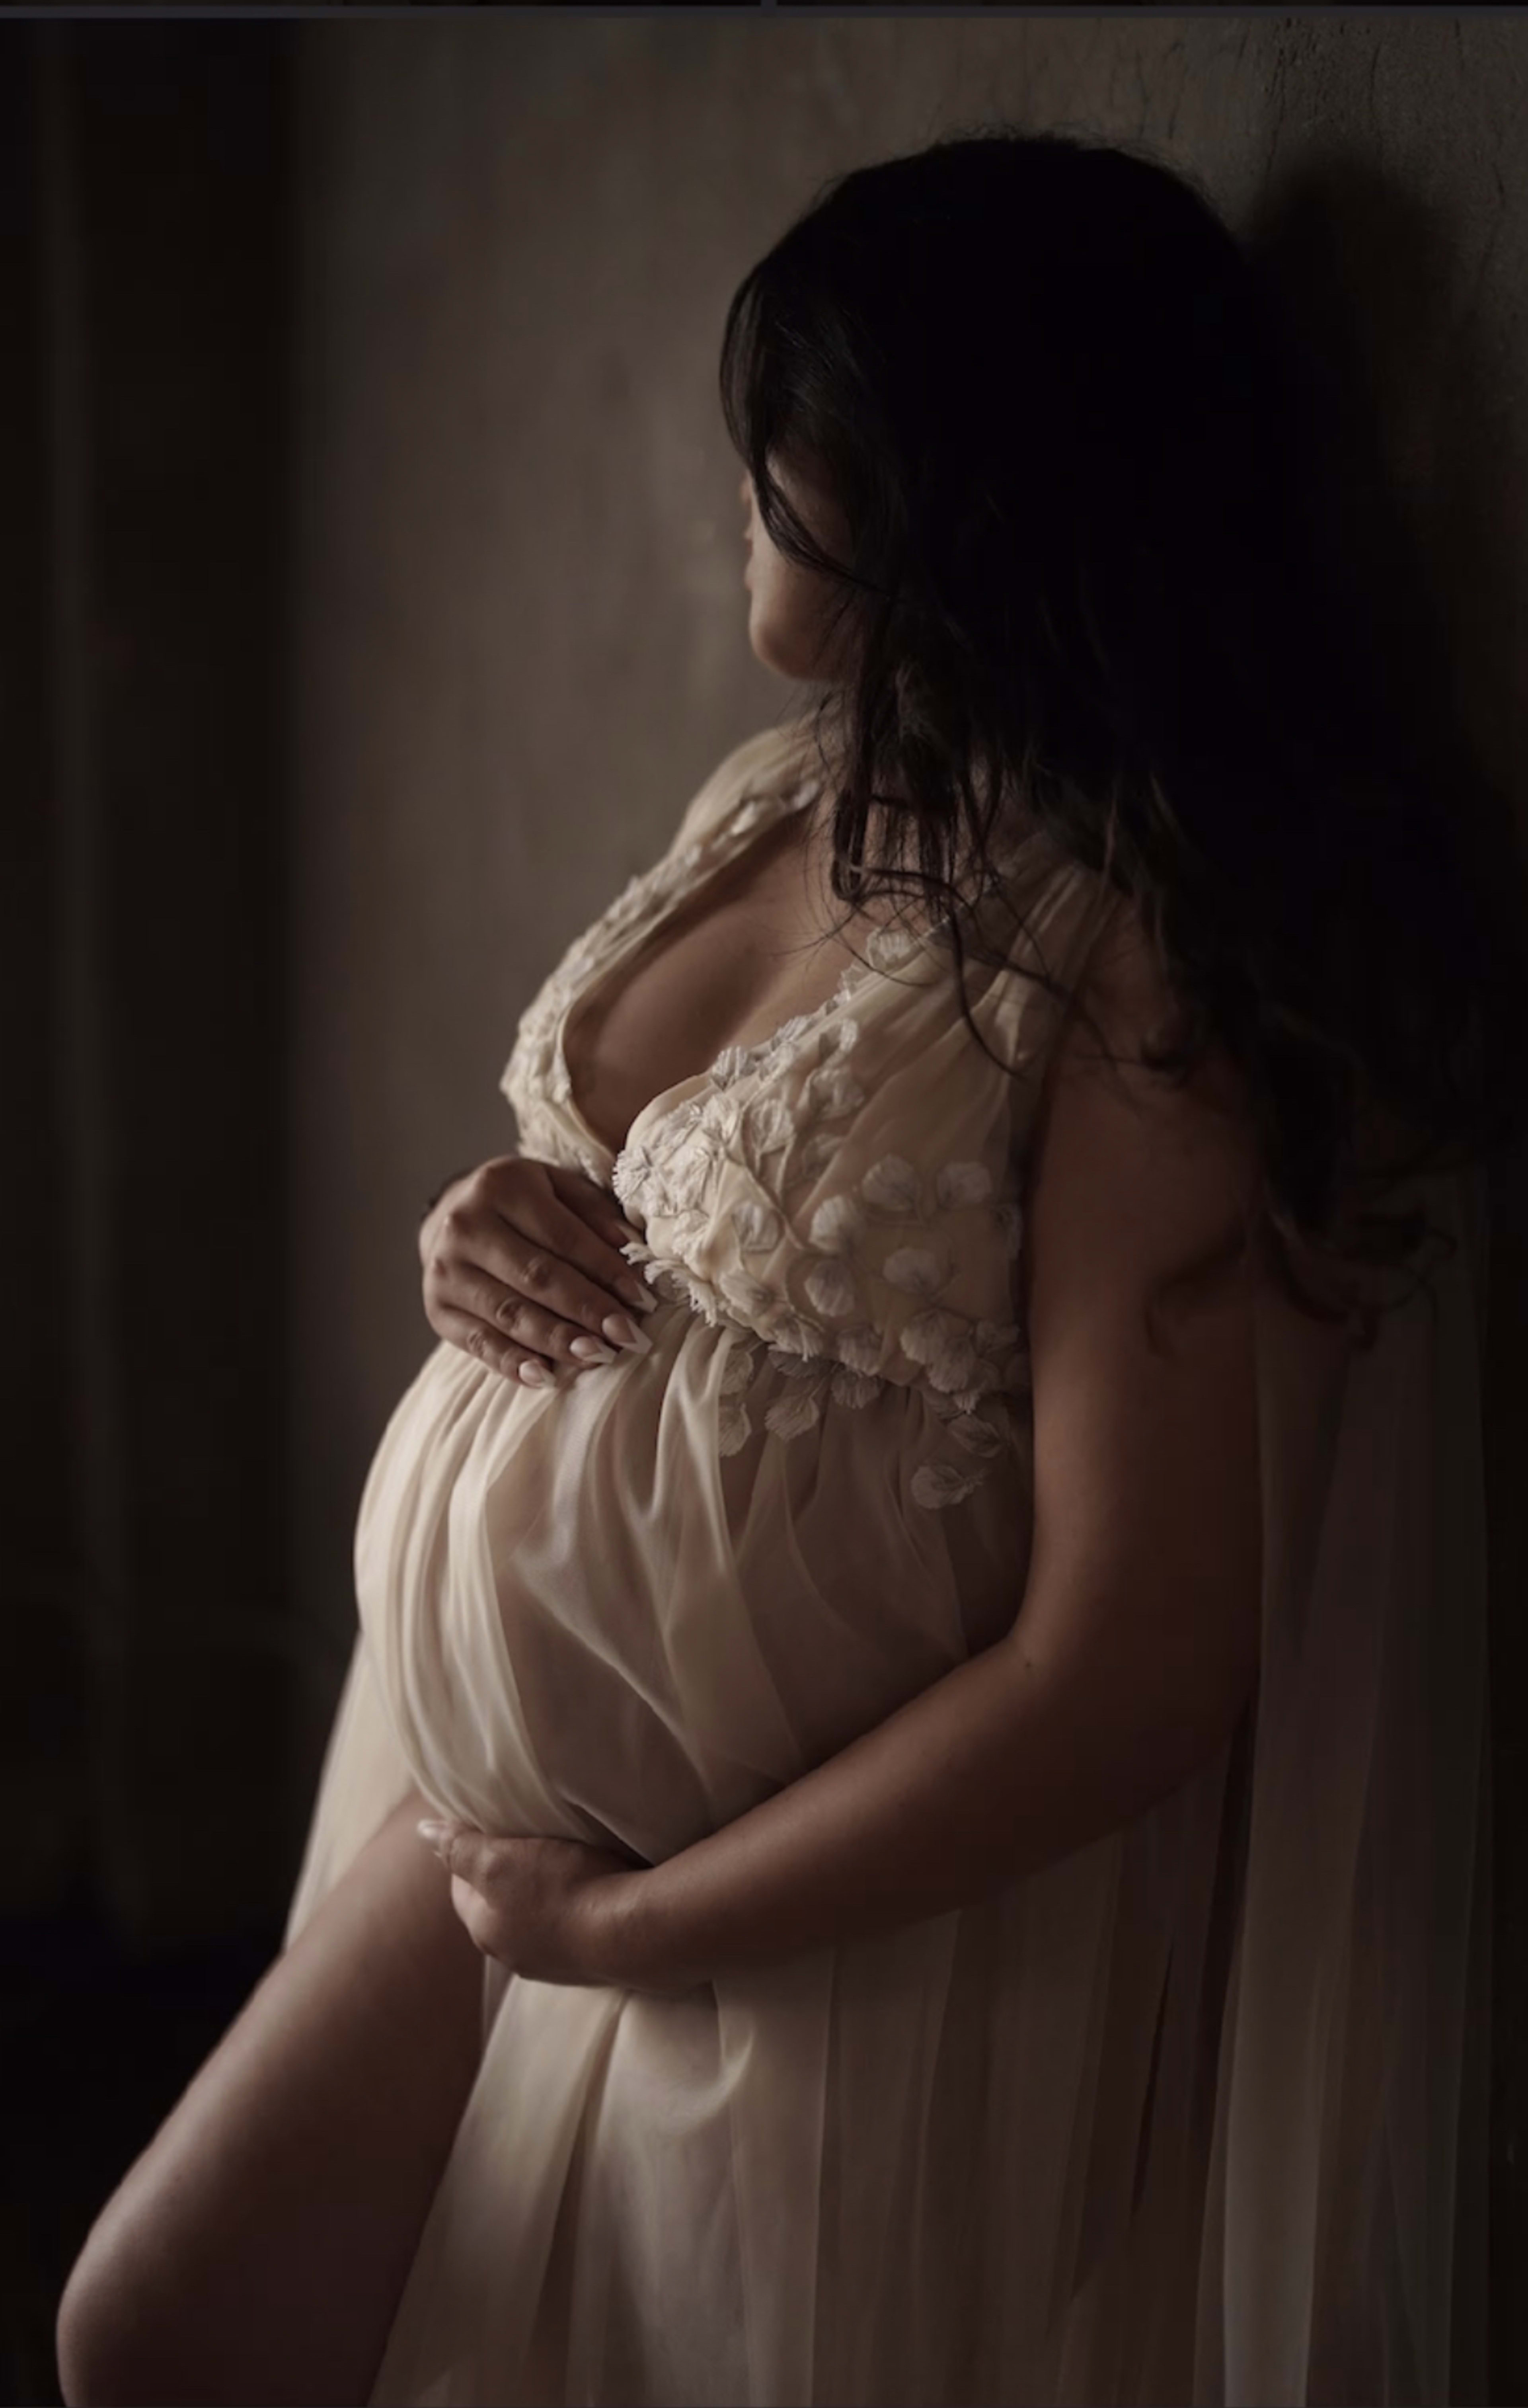 A pregnant woman in a beige dress poses for a maternity photoshoot.